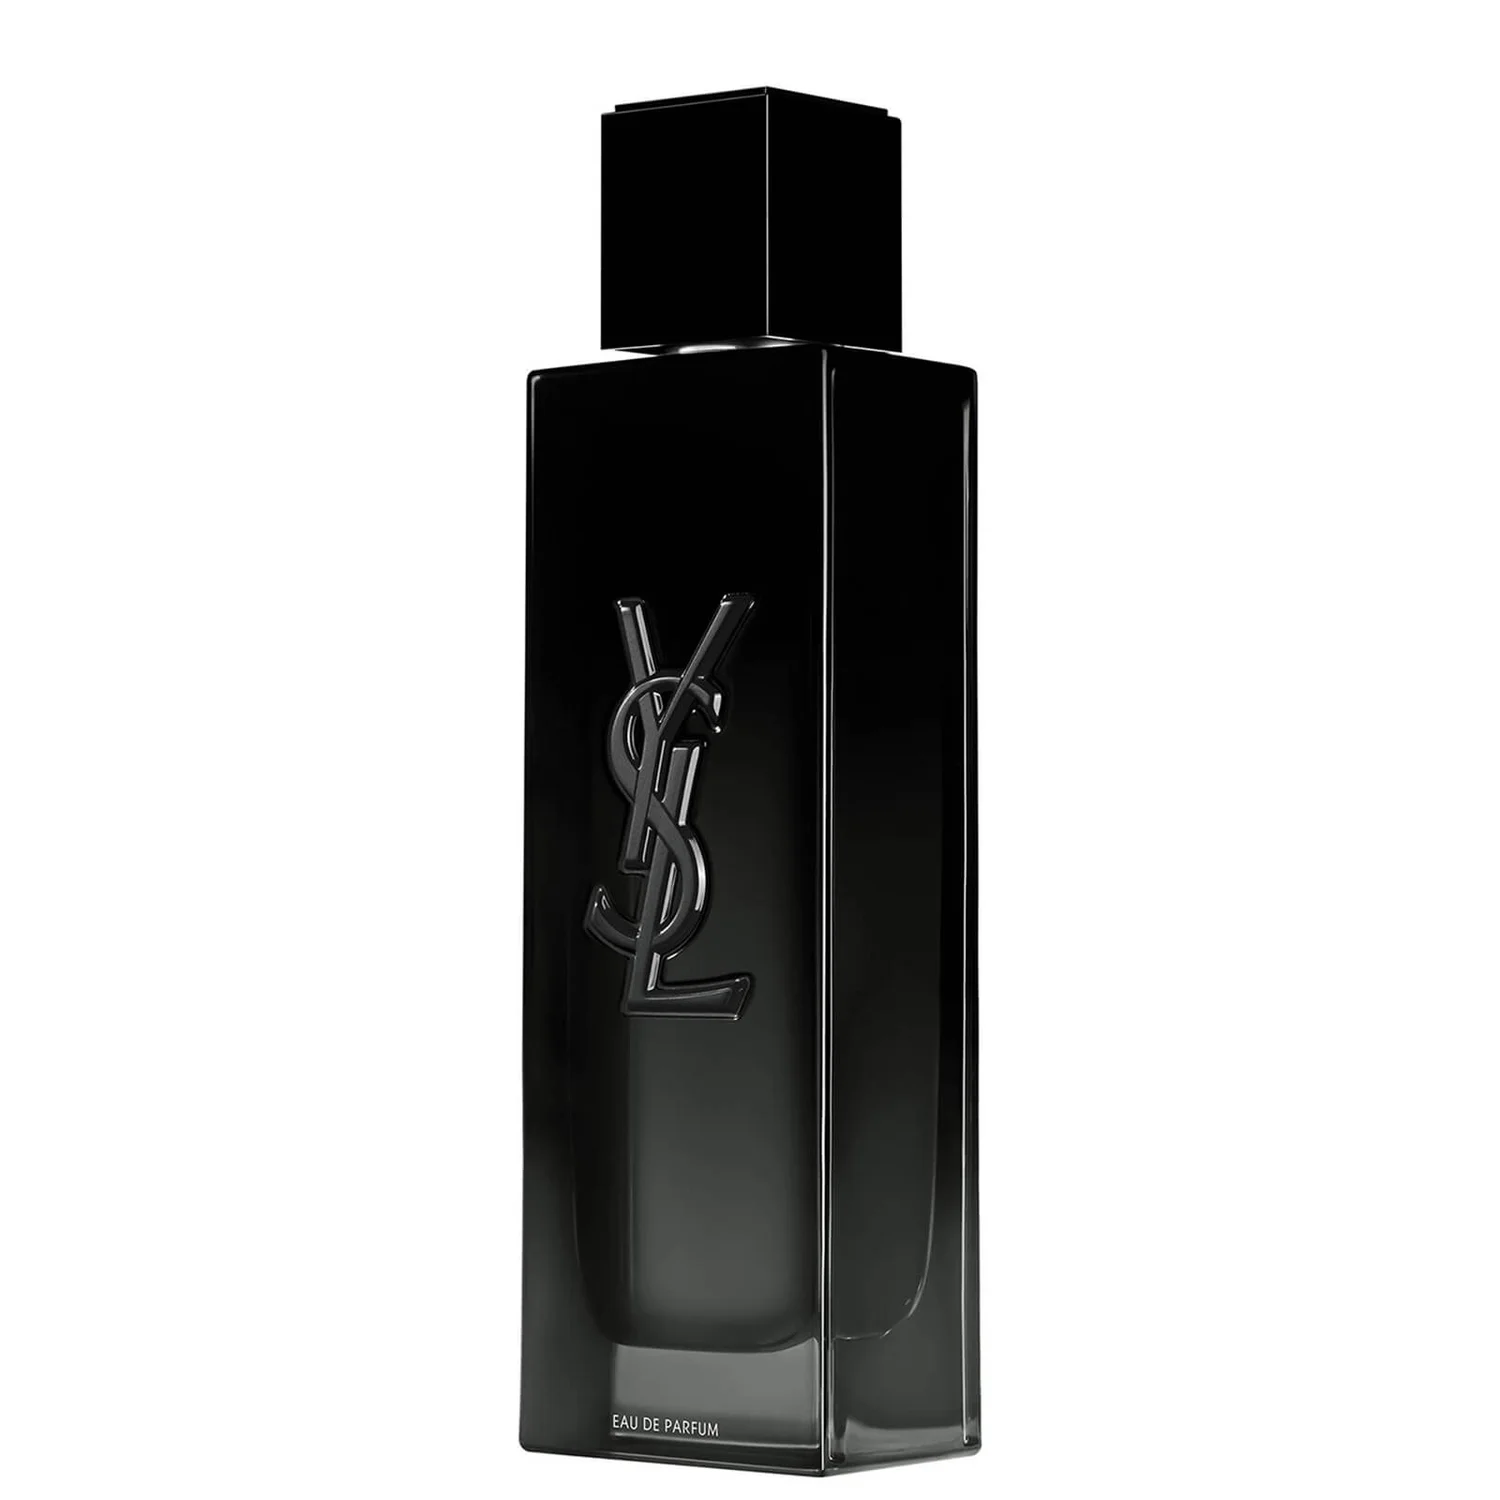 Louis Vuitton launches its first unisex fragrance line - Fashion